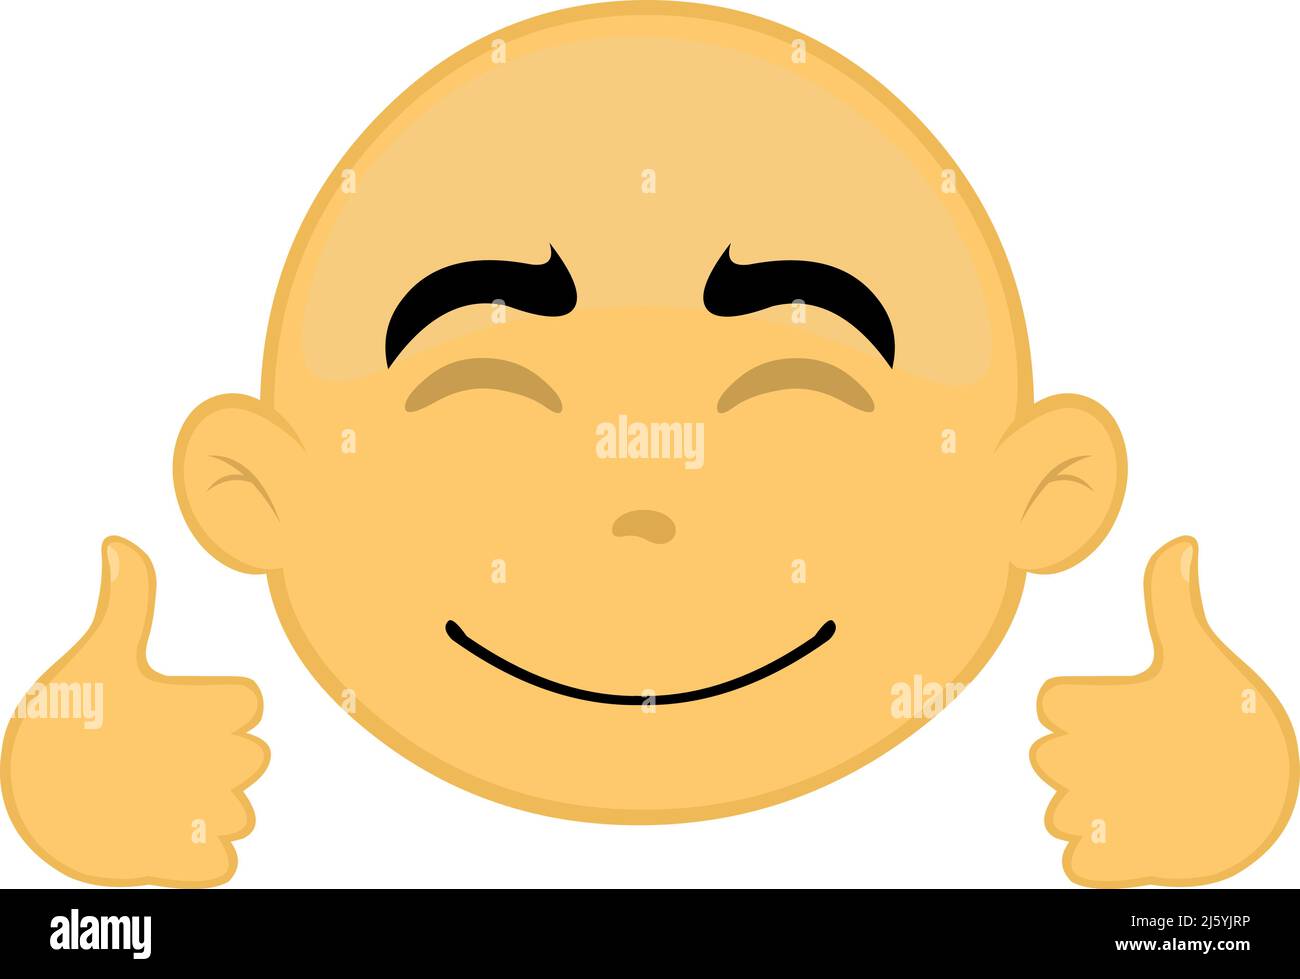 Vector illustration of the face of a bald, yellow cartoon character with a  happy expression and making a thumbs up gesture with his hands Stock Vector  Image & Art - Alamy